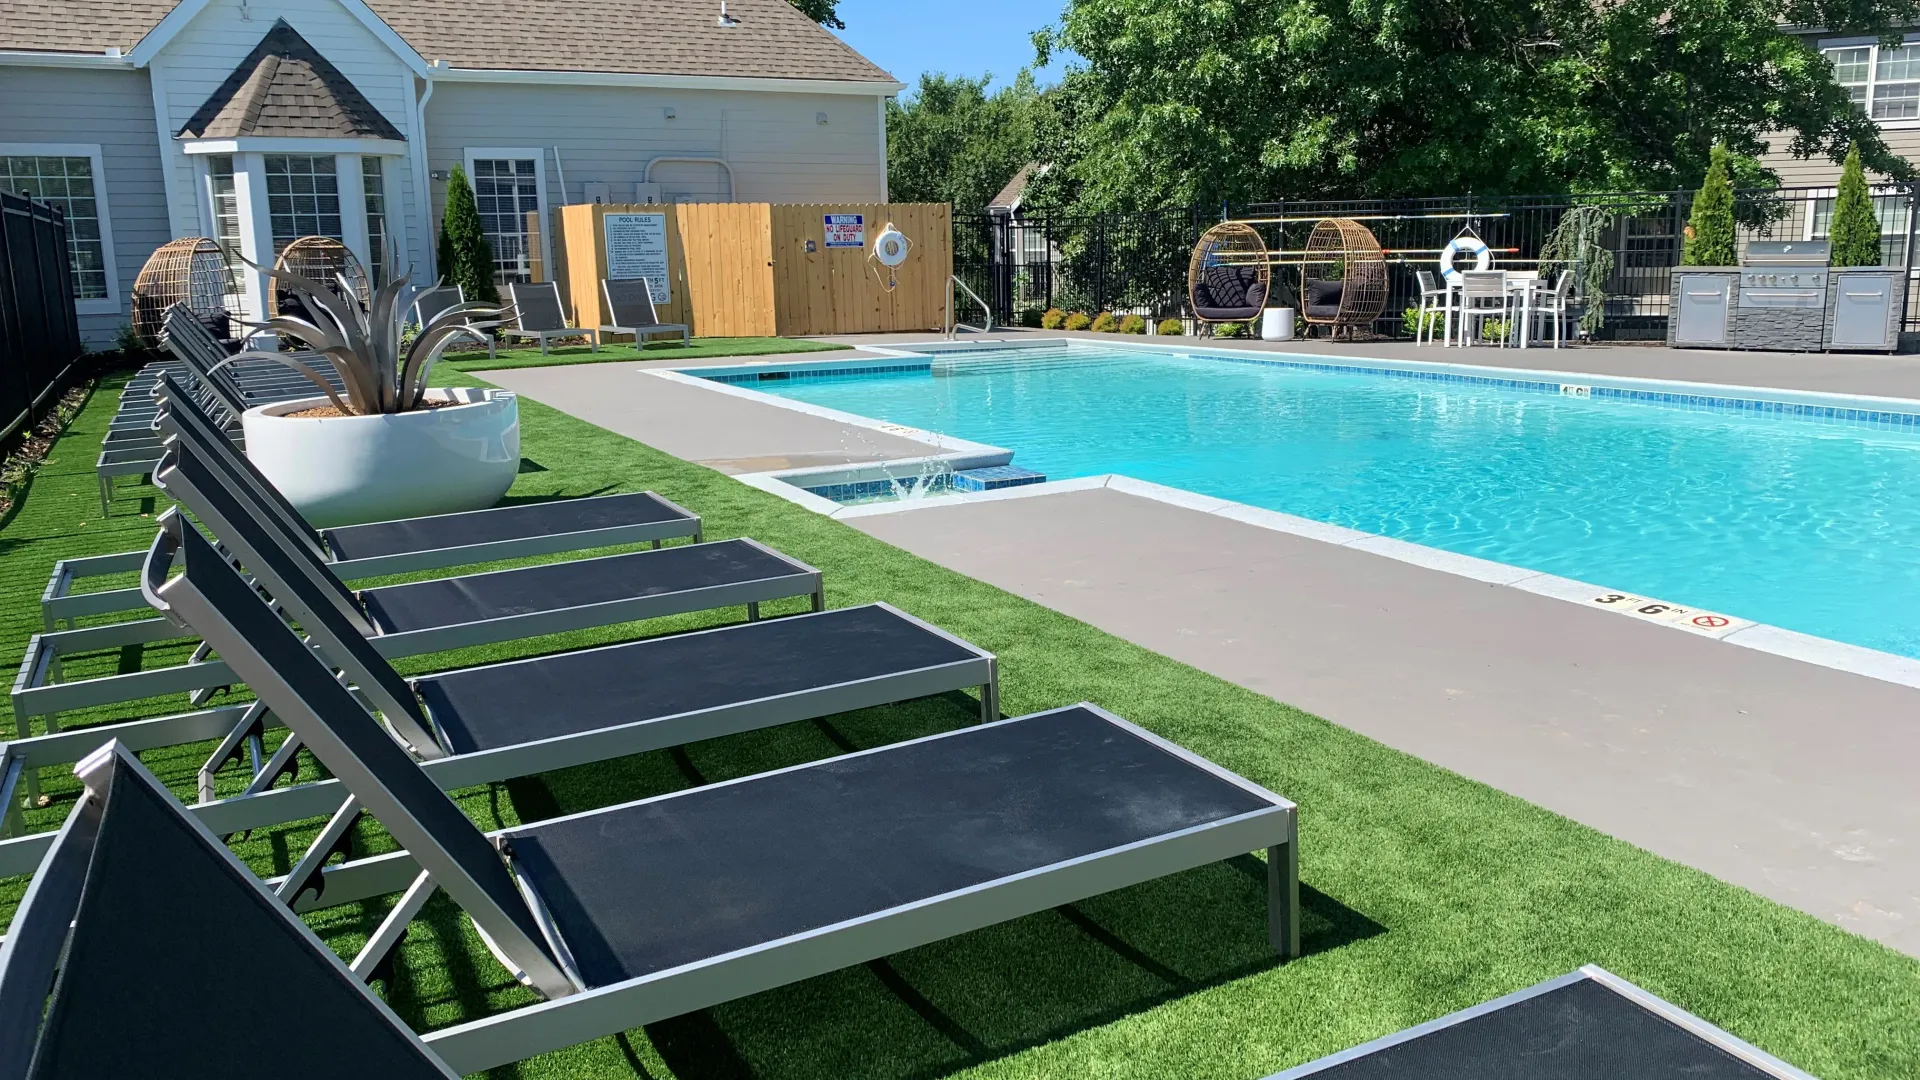 Glistening rectangular-shaped pool with a row of sun loungers